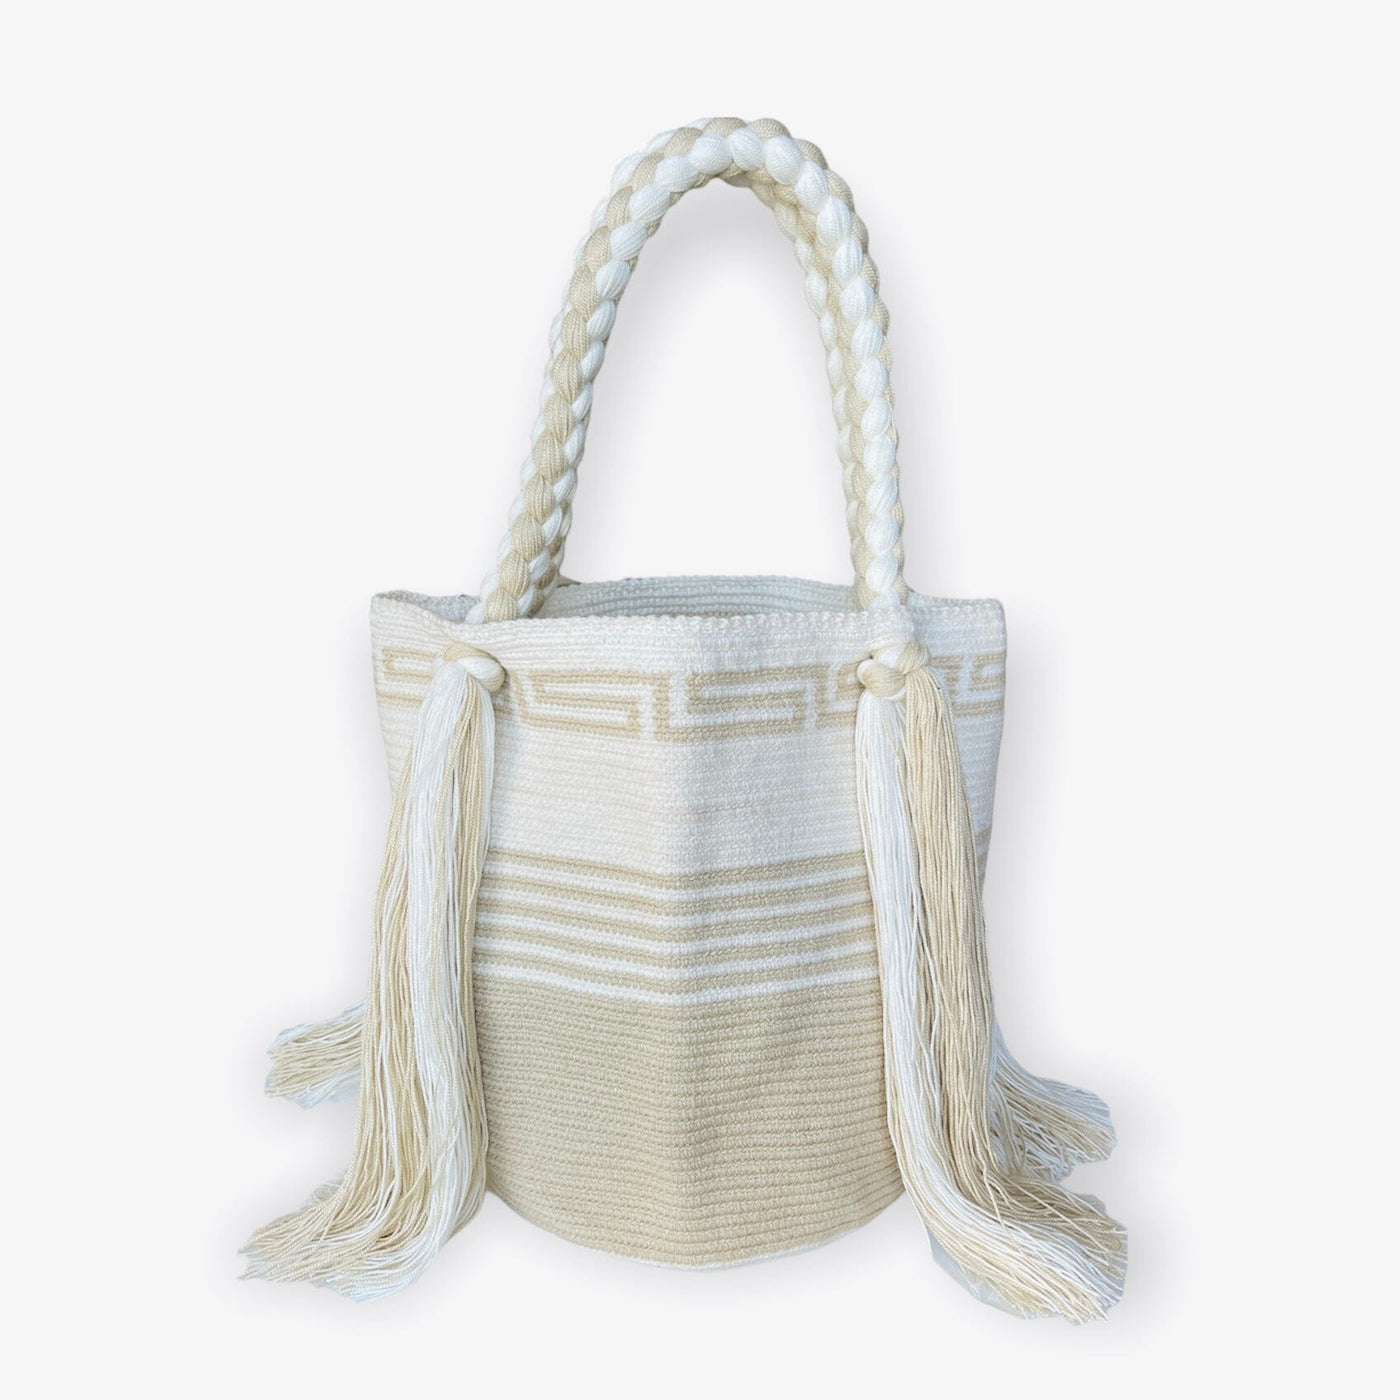 Off-White Striped Tote Bag | Neutral Striped Shoulder Bag | White Purse with Tassels | Colorful 4U